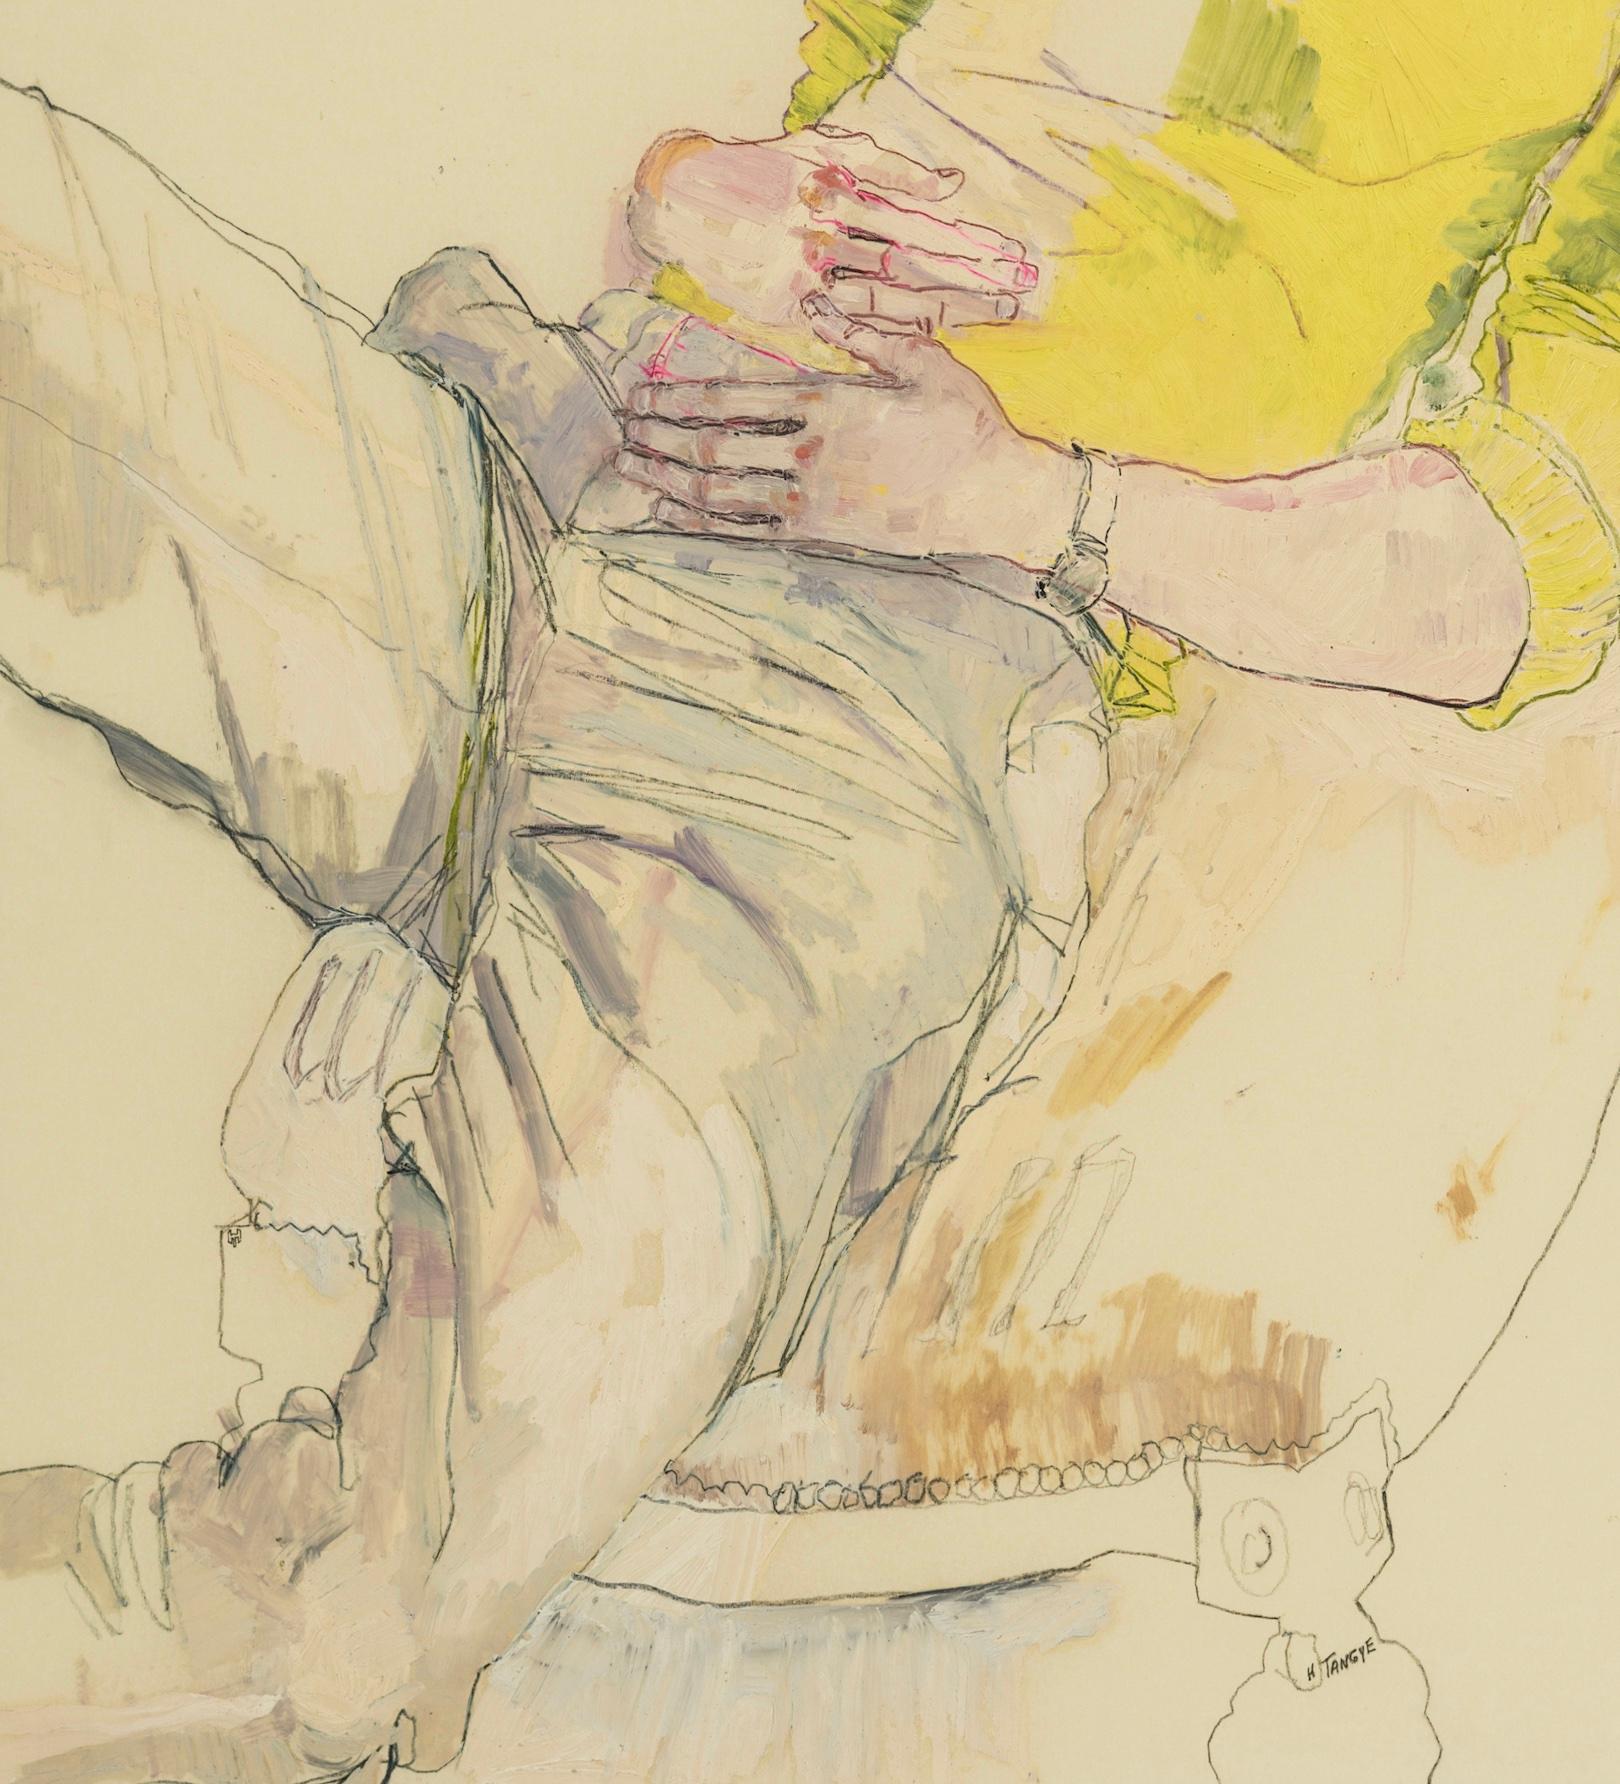 Howard Tangye (b.1948, Australia) has been an influential force in fashion for decades. Lecturing at London’s Central Saint Martins for 35 years, including 16 years as head of BA Womenswear. There, he tutored many contemporary greats, including John